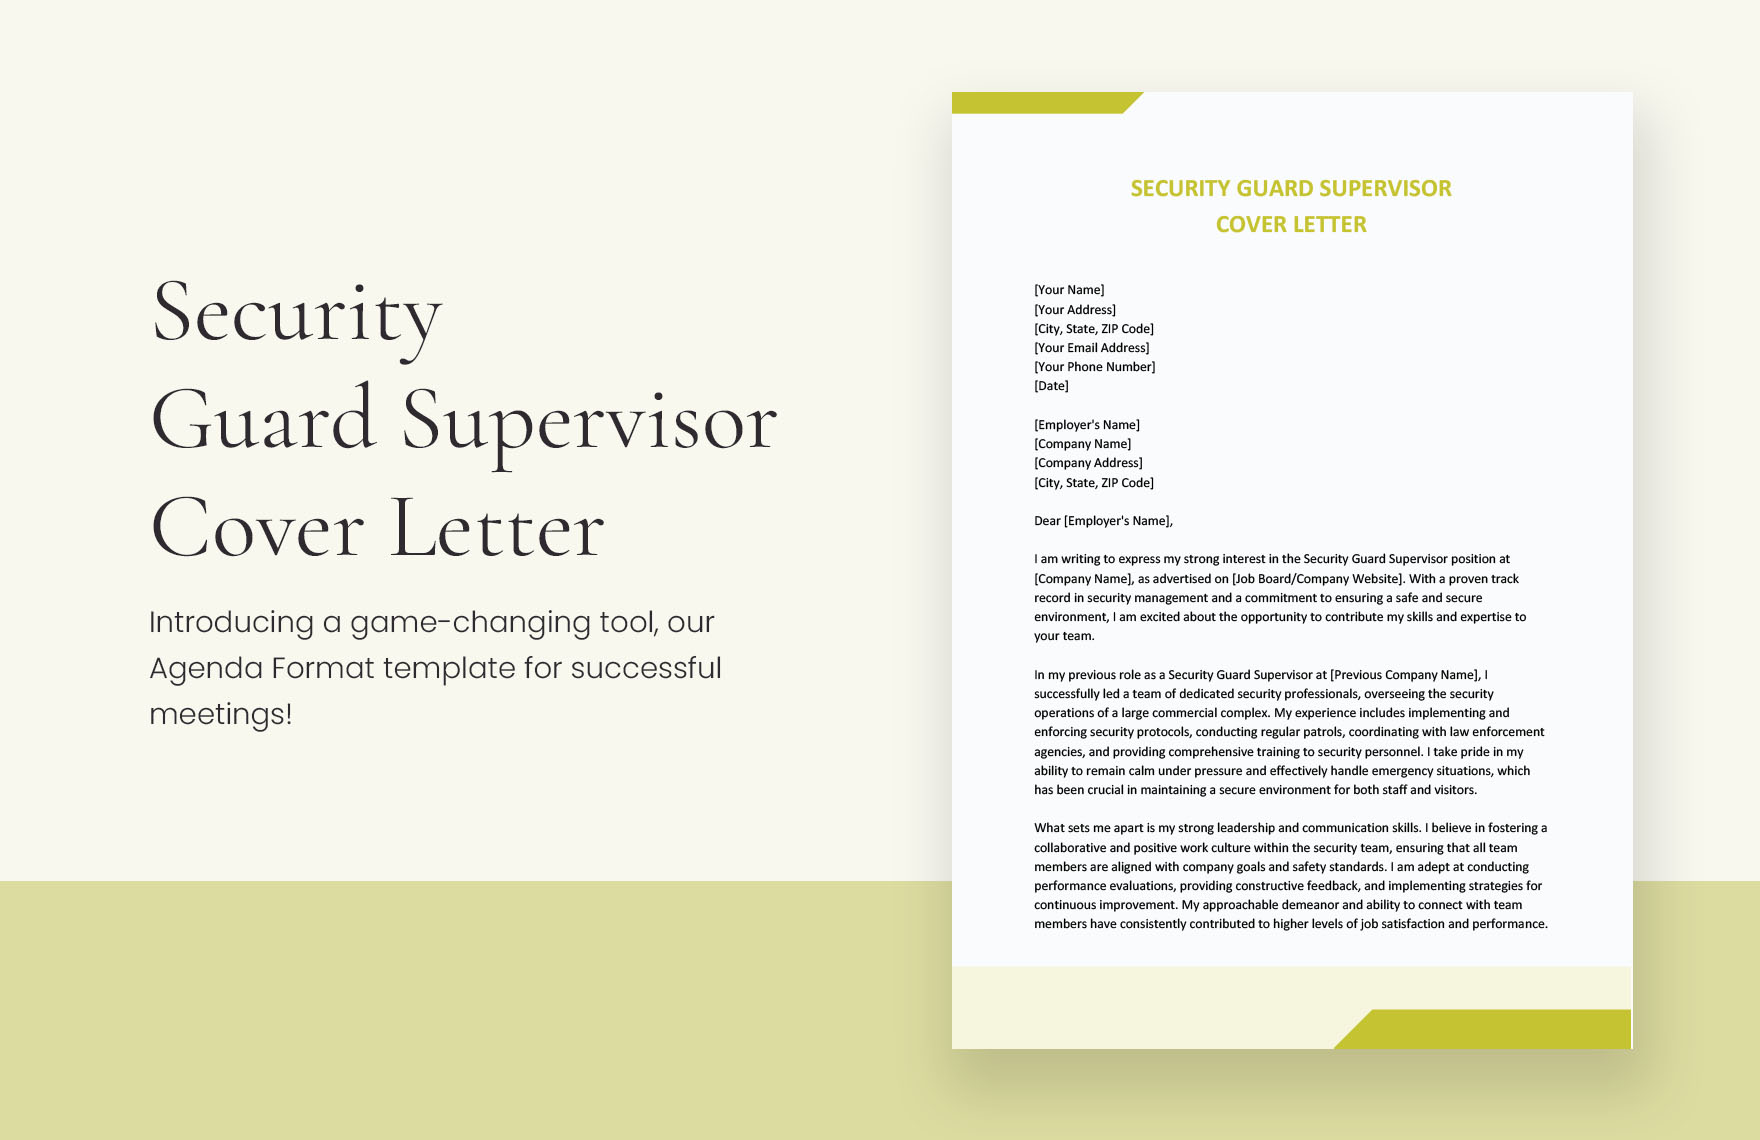 Security Guard Supervisor Cover Letter in Word, Google Docs